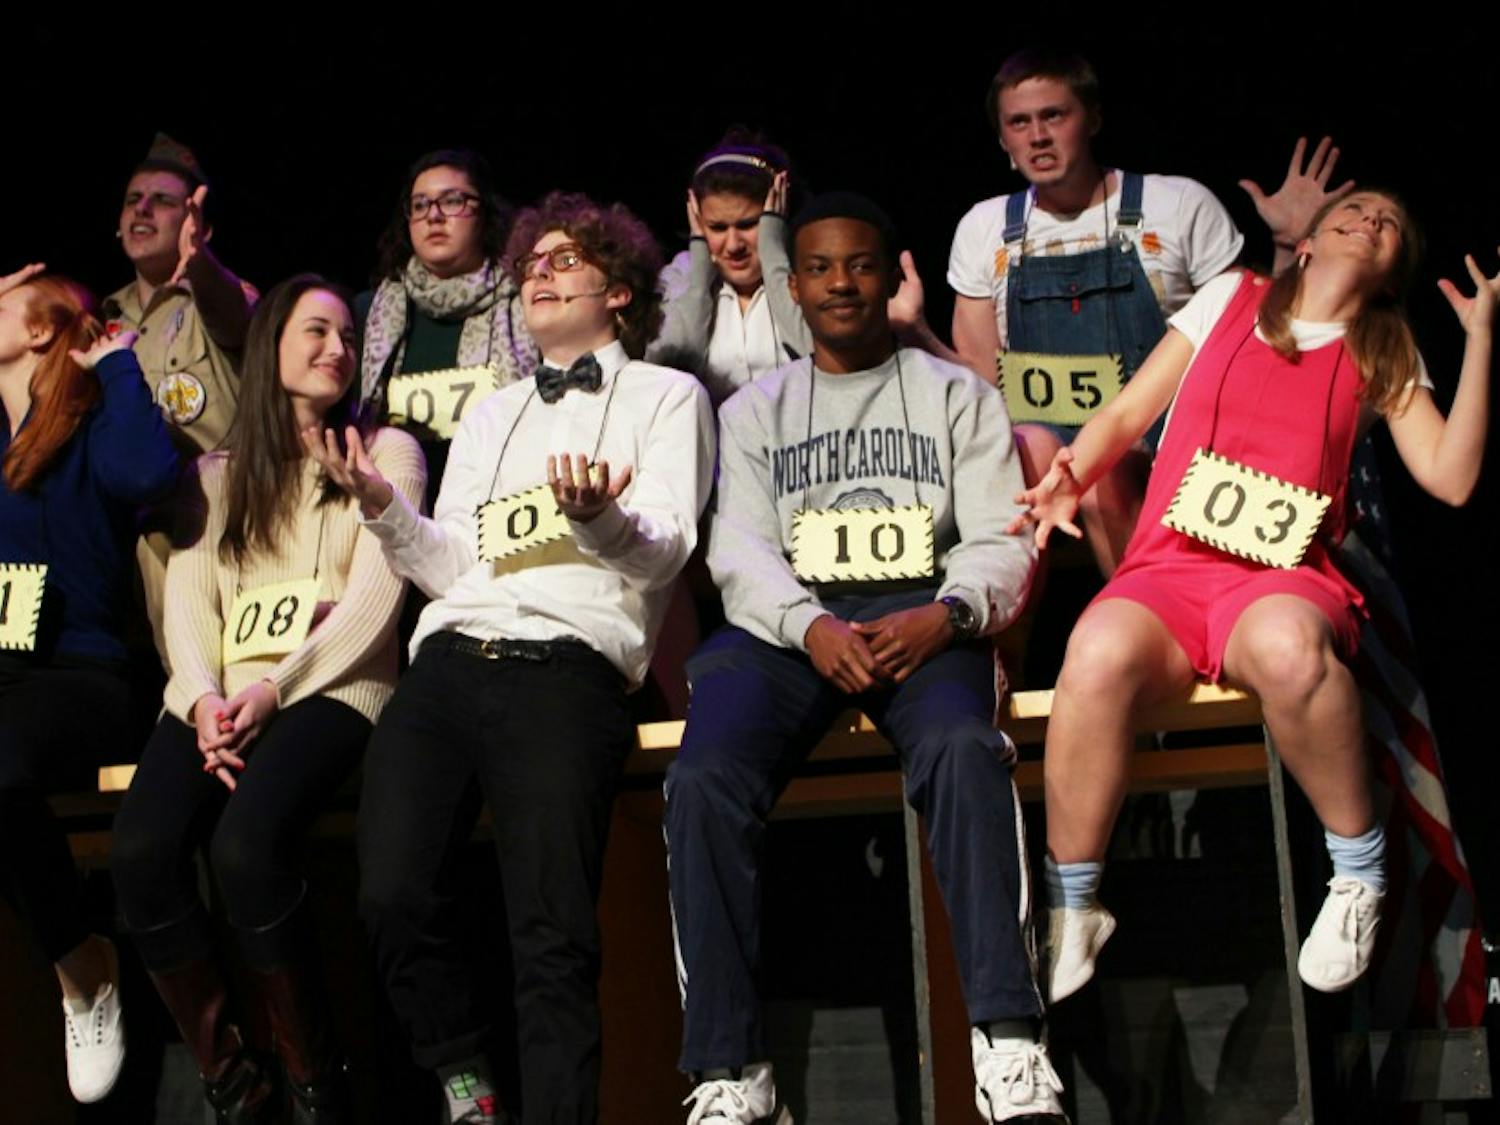 25th Annual Putnam County Spelling Bee, directed by Andrew Jones, opens Friday March 1st at the Historic Playmakers Theater.